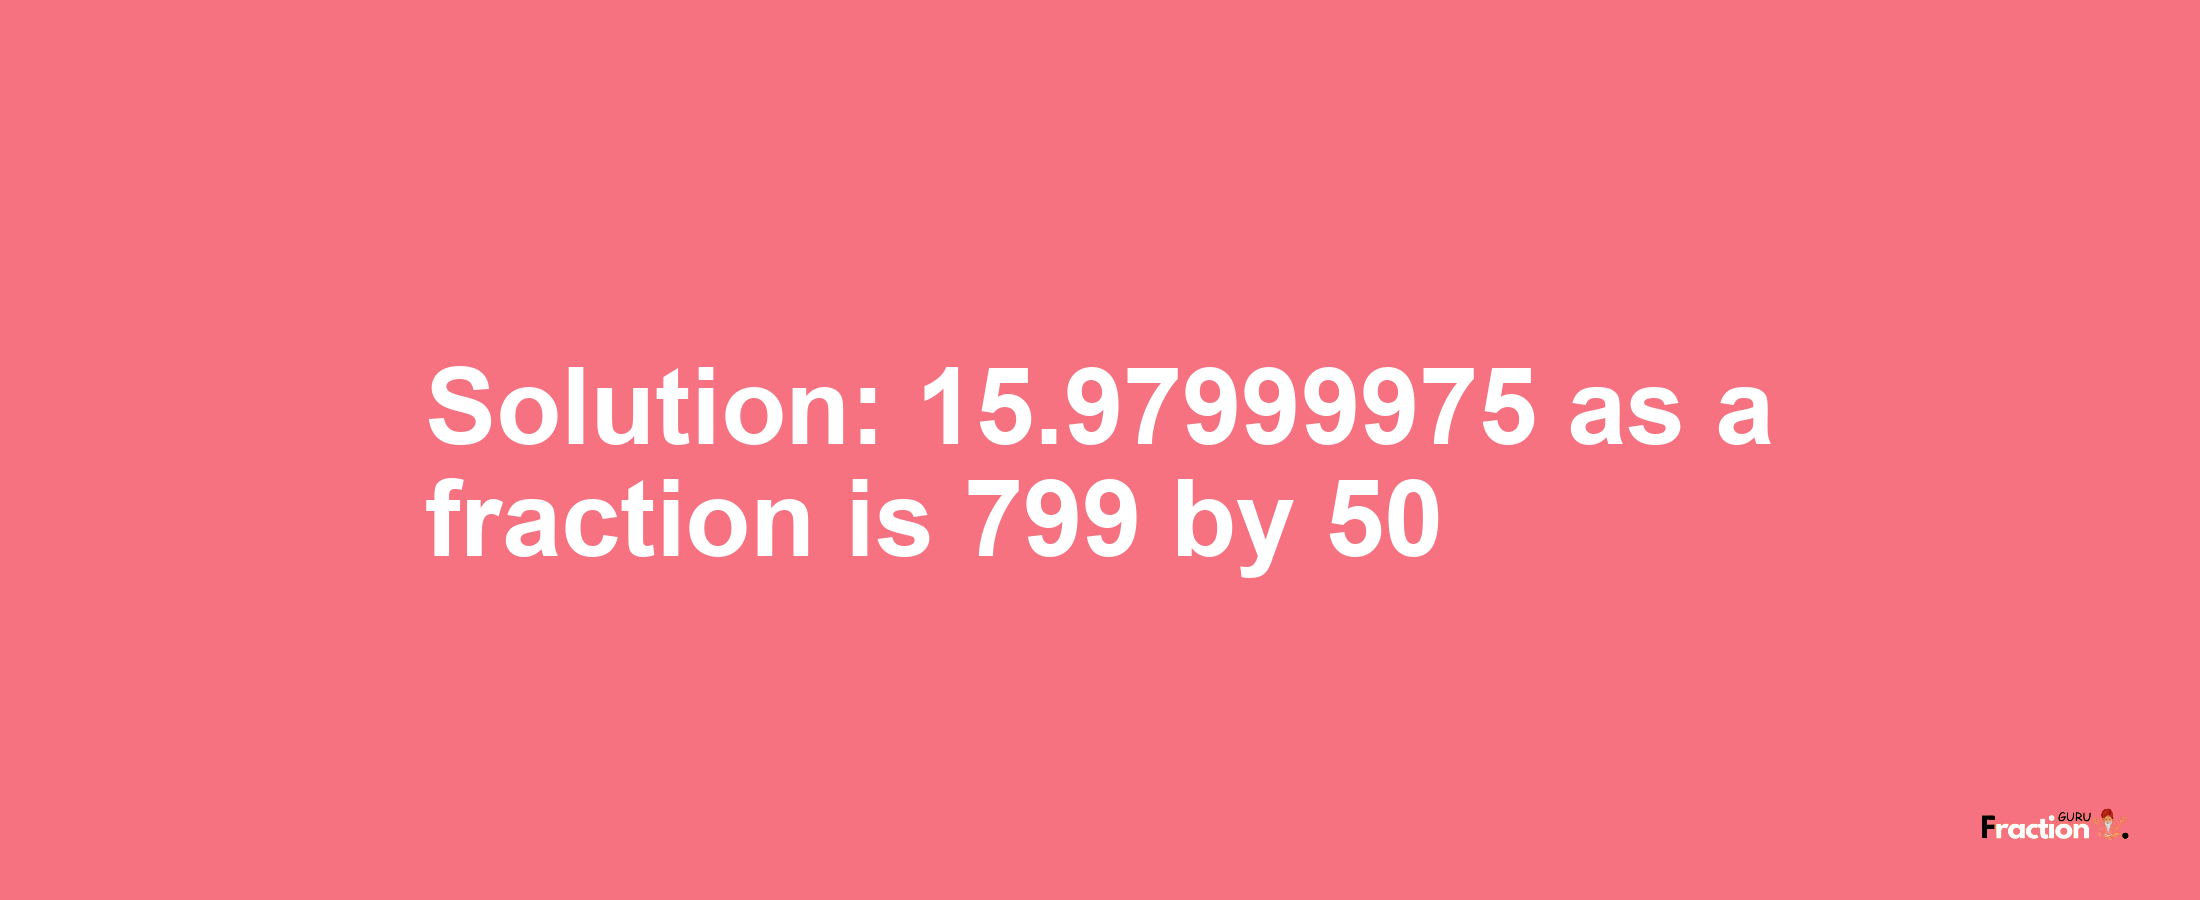 Solution:15.97999975 as a fraction is 799/50